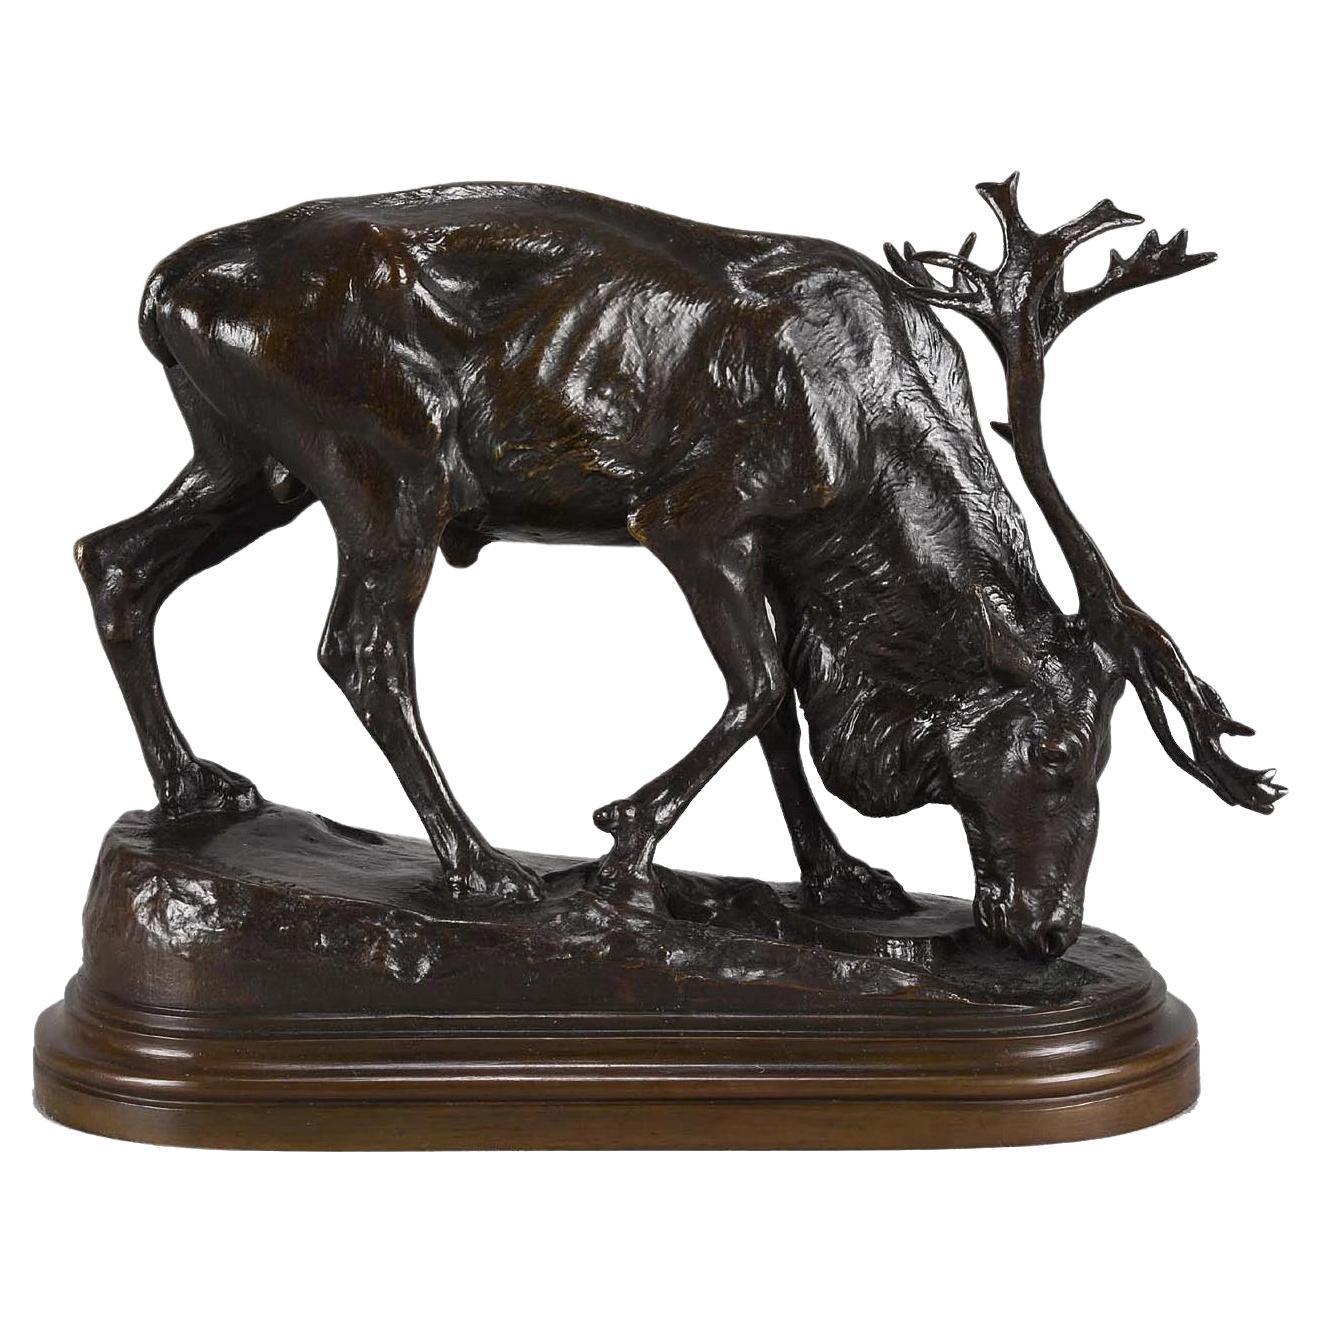 19th Century Animalier Bronze Sculpture Entitled "Reindeer" by Isidore Bonheur For Sale